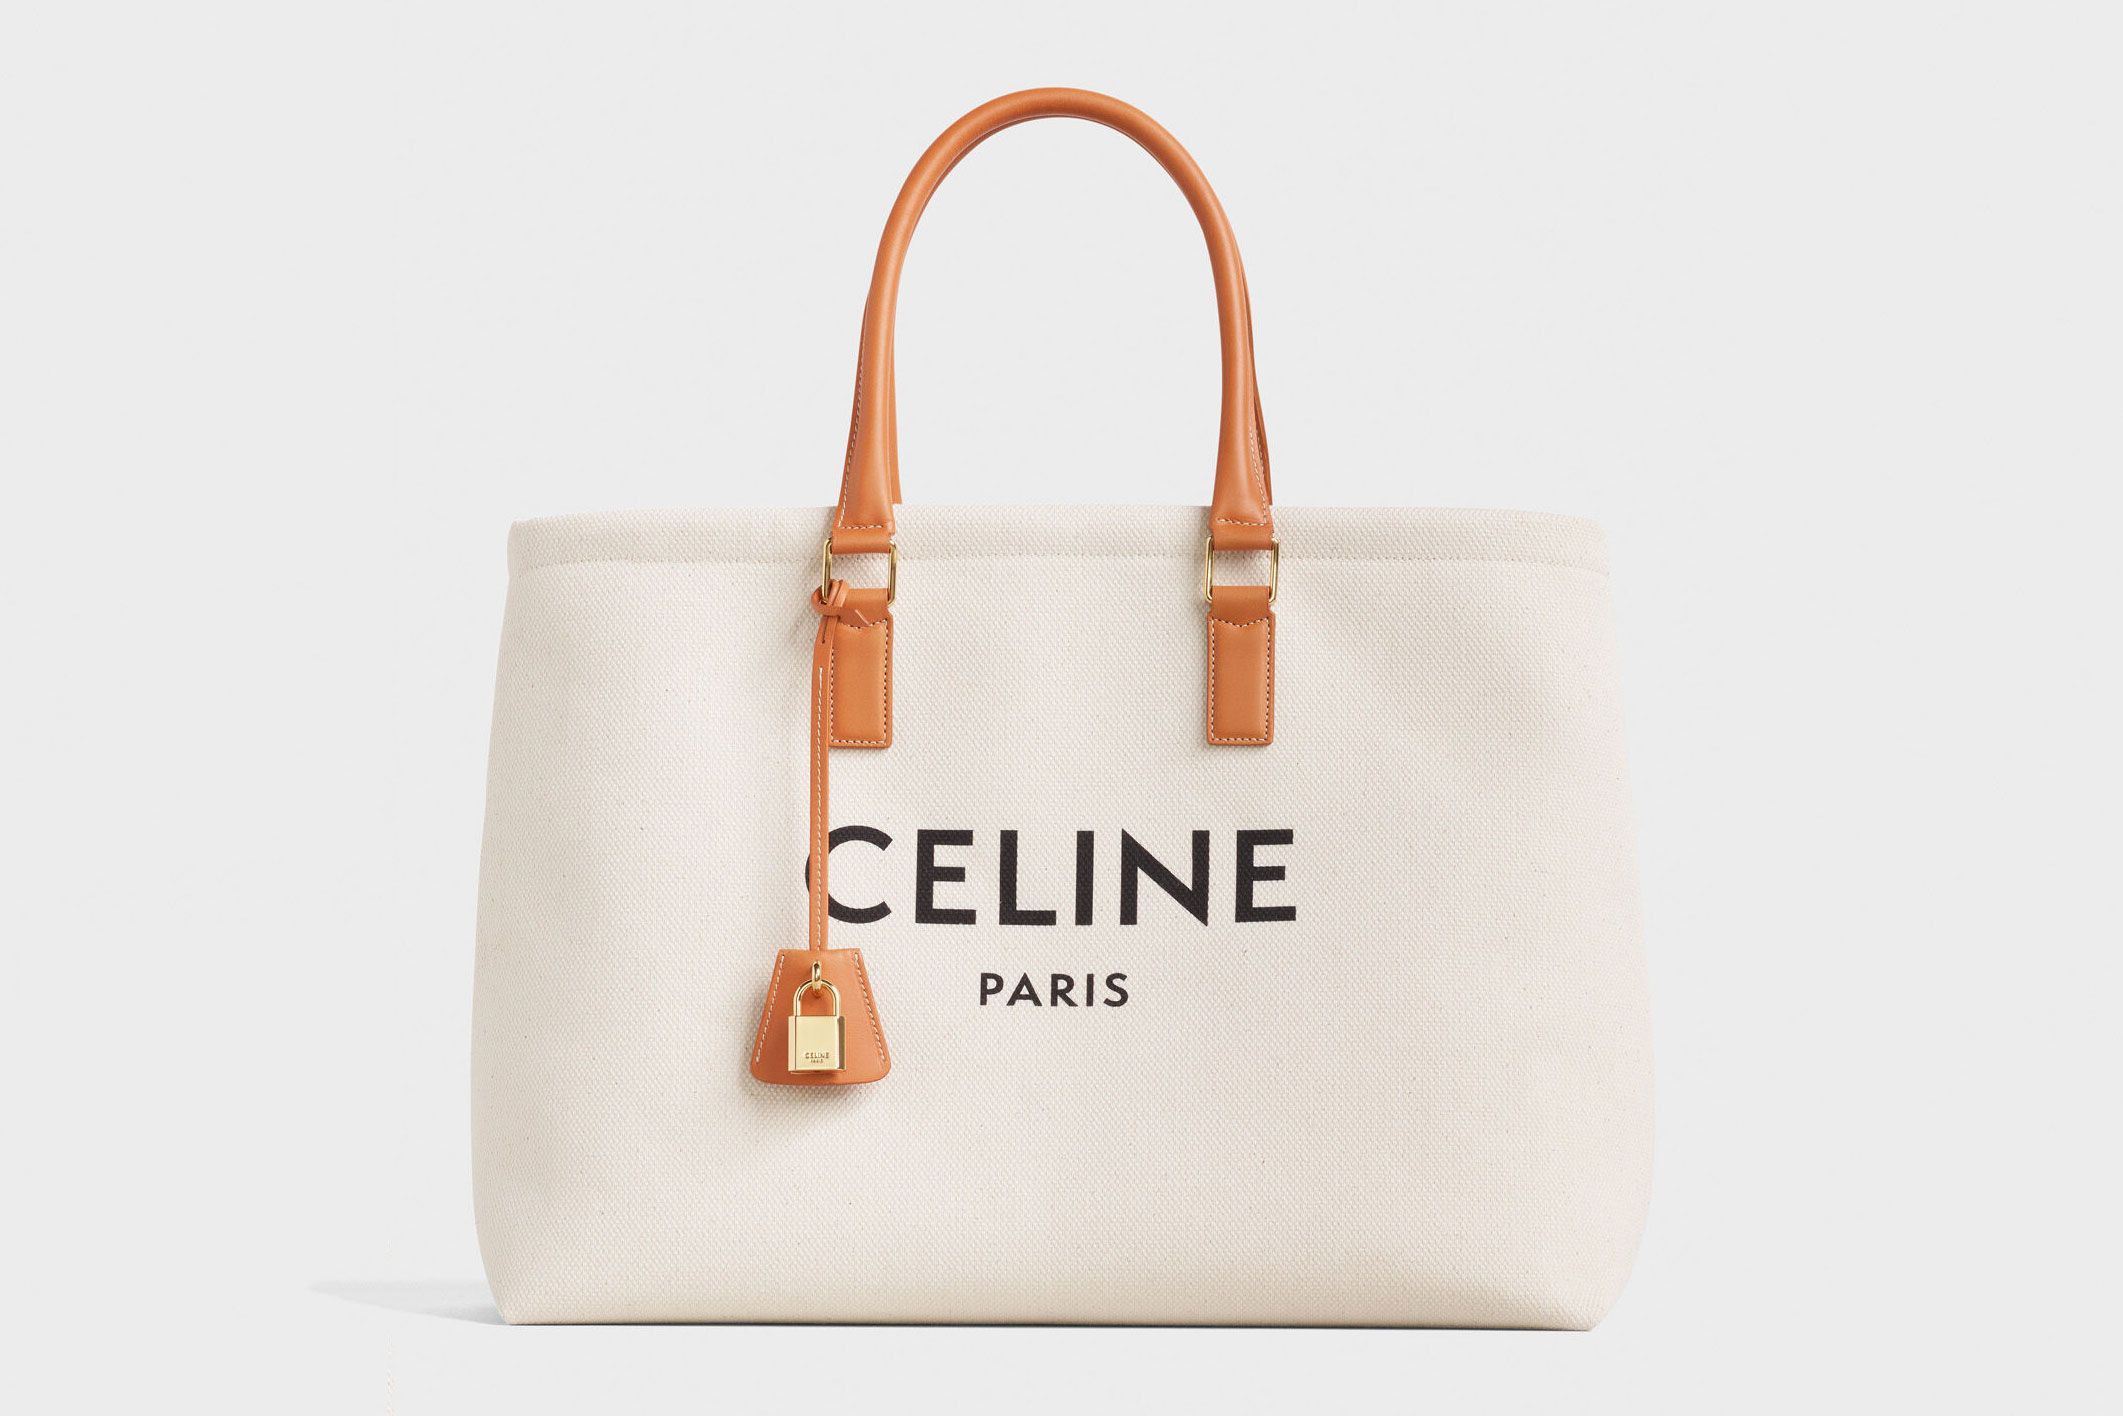 You Can Now Shop Celine's Winter 2020 Collection